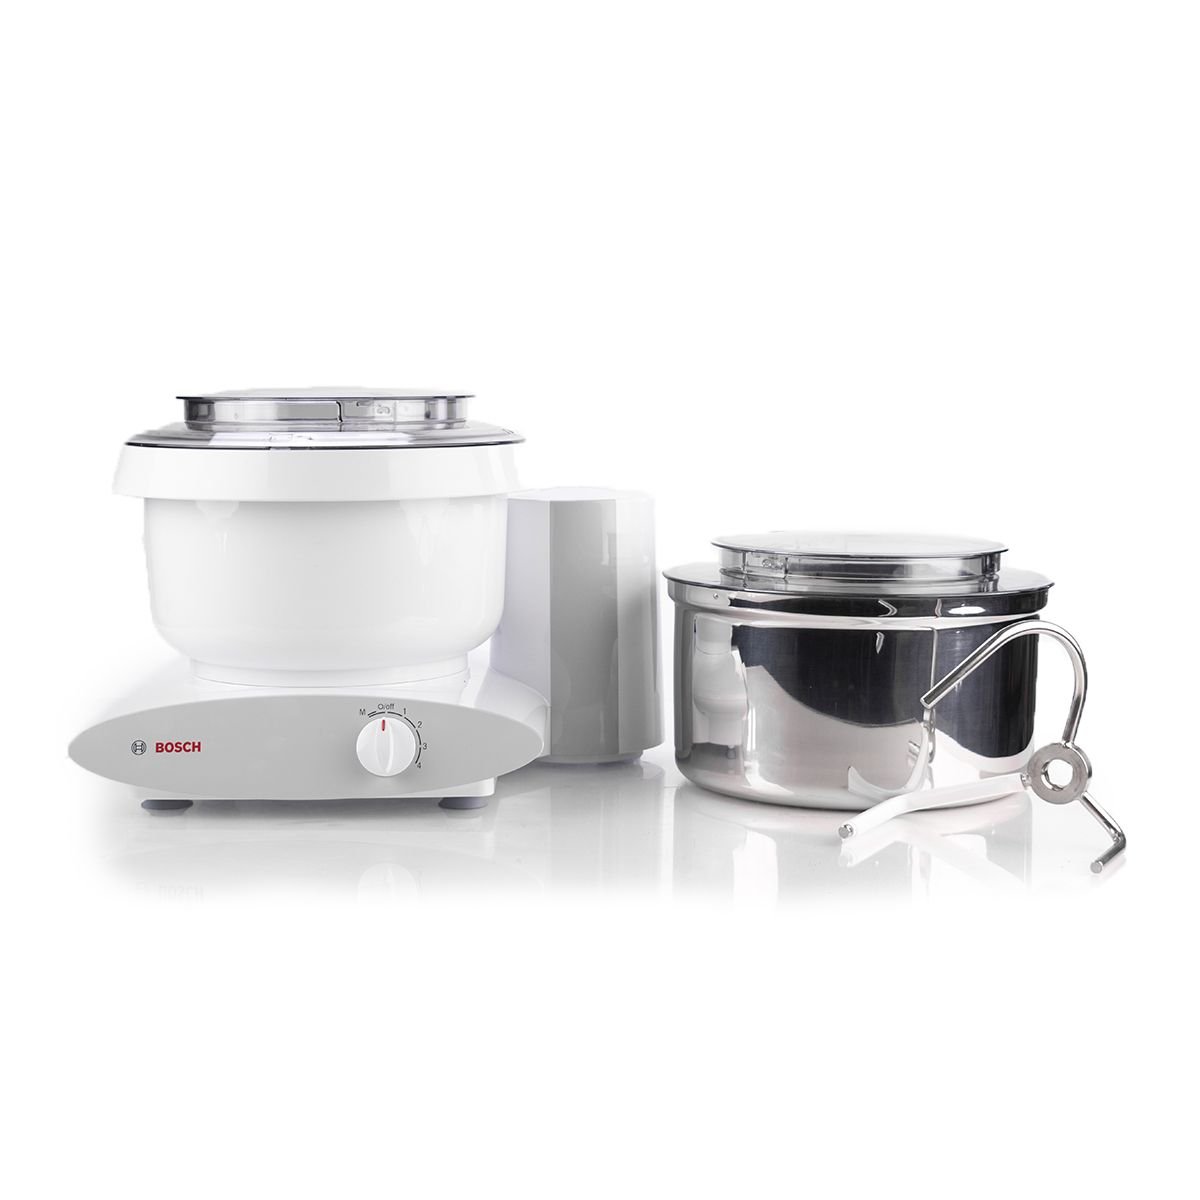 Bosch Universal Plus 6.5 qt. Mixer + Stainless Steel Mixing Bowl